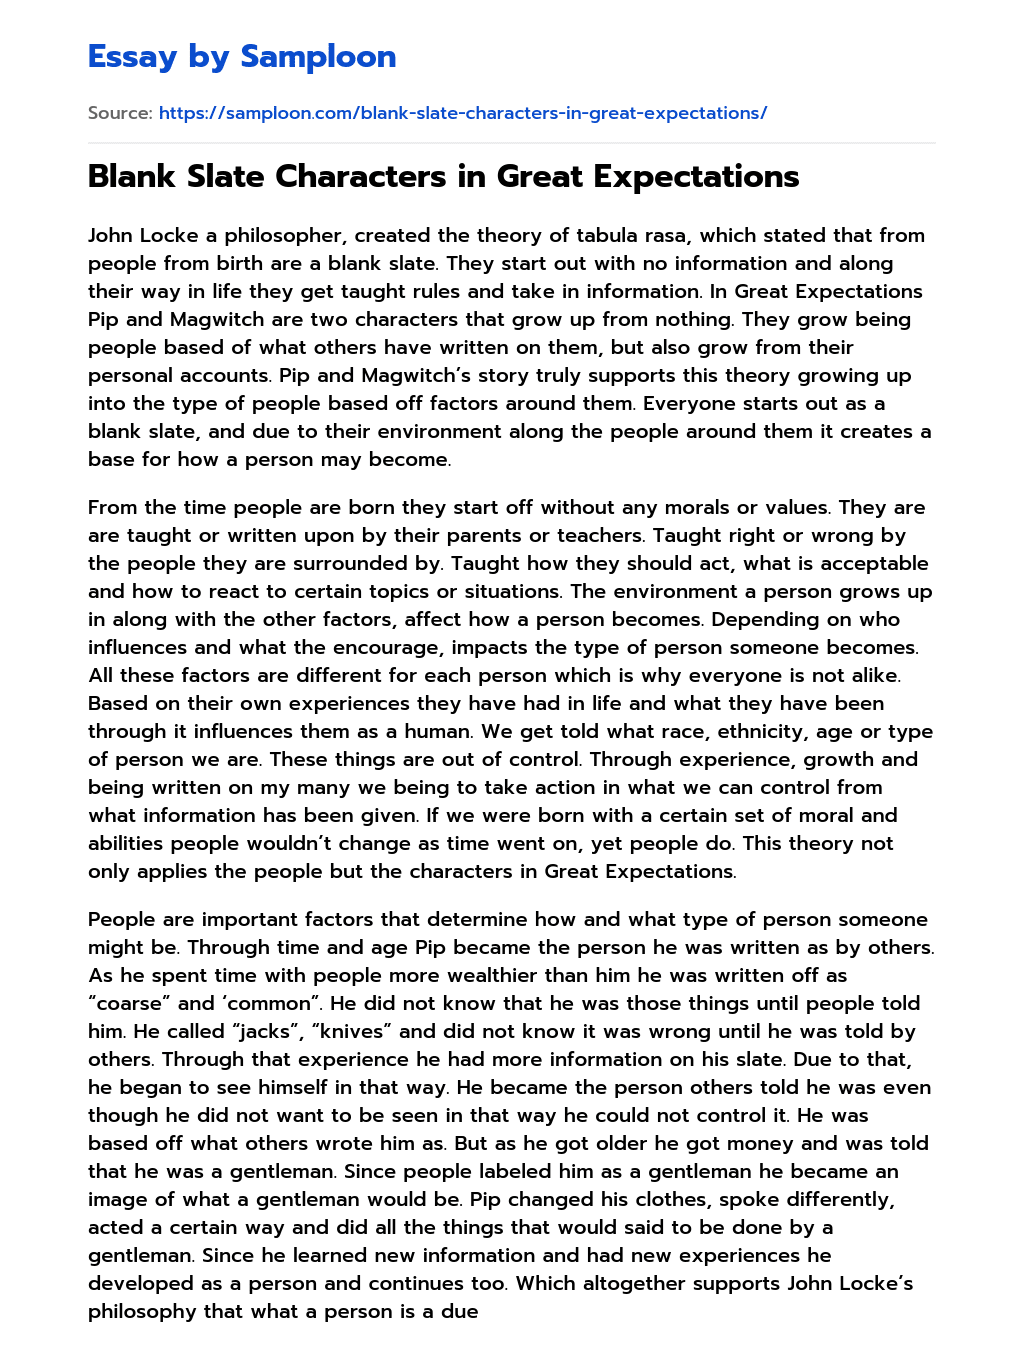 Blank Slate Characters in Great Expectations Personal Essay essay